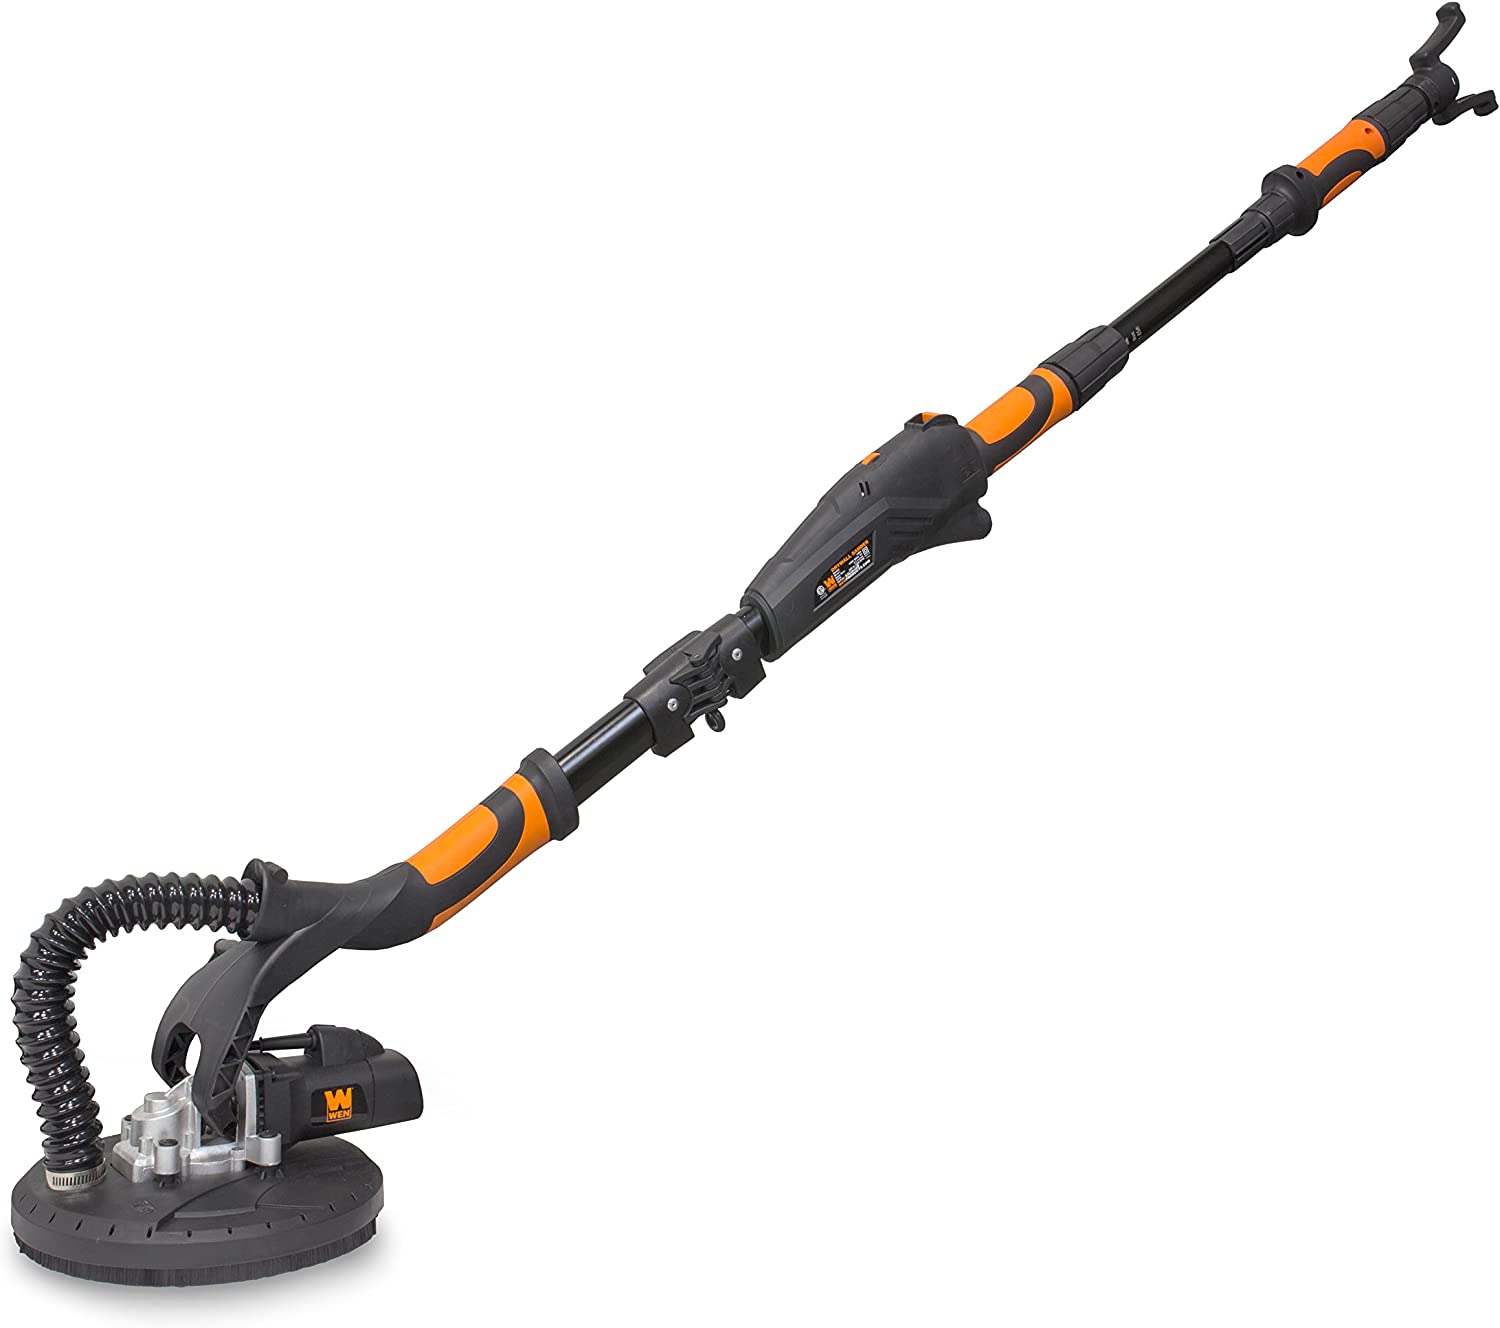 WEN 6369 Variable Speed 5 Amp Drywall Sander with 15' Hose